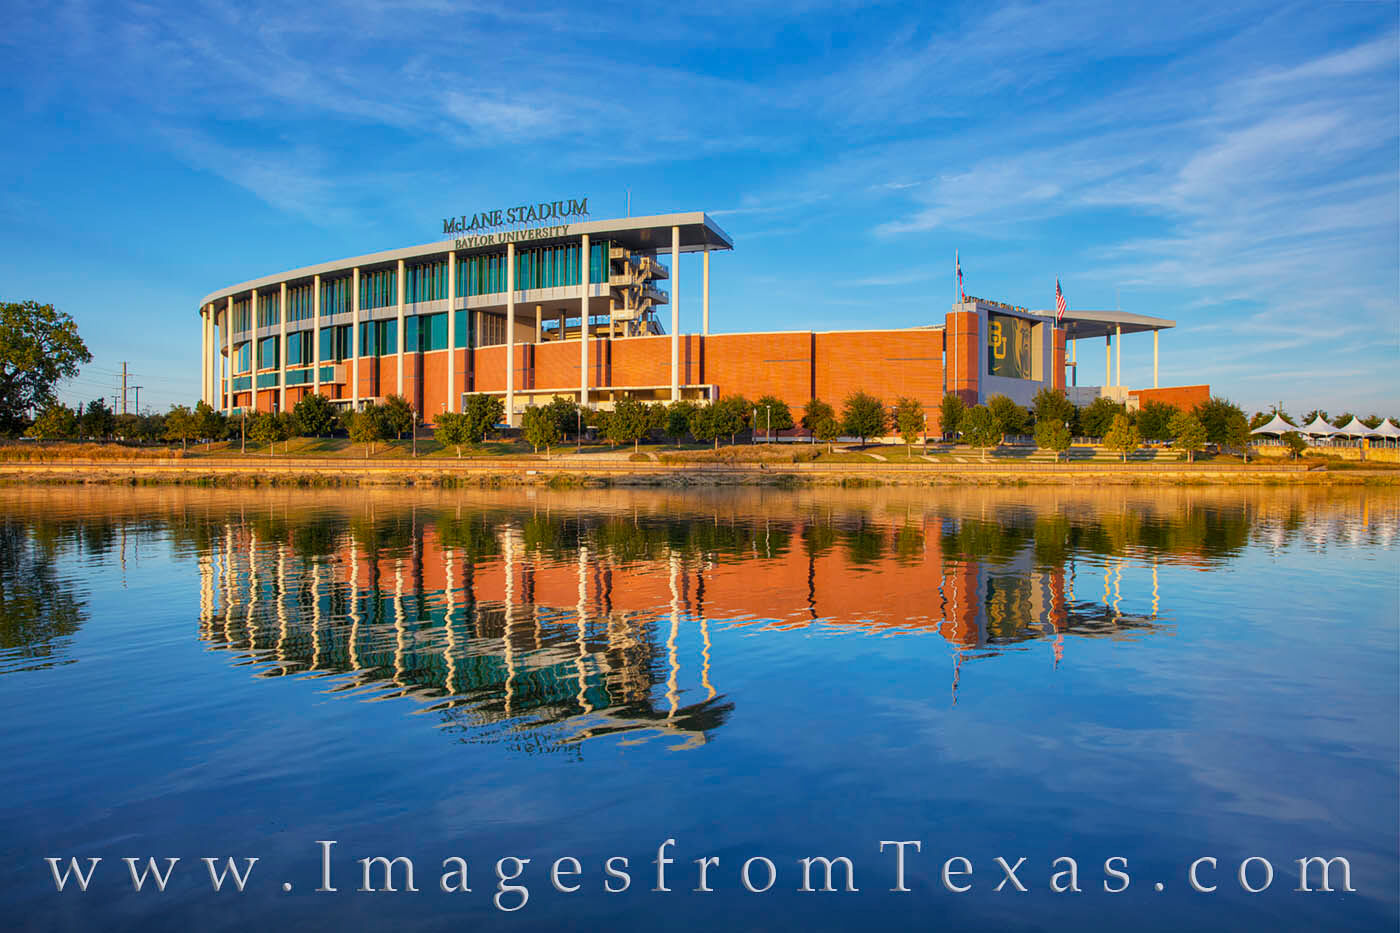 Home of the Baylor University football team, McLane Stadium opened in 2014 at a cost of 266 million dollars. It sits on the banks...